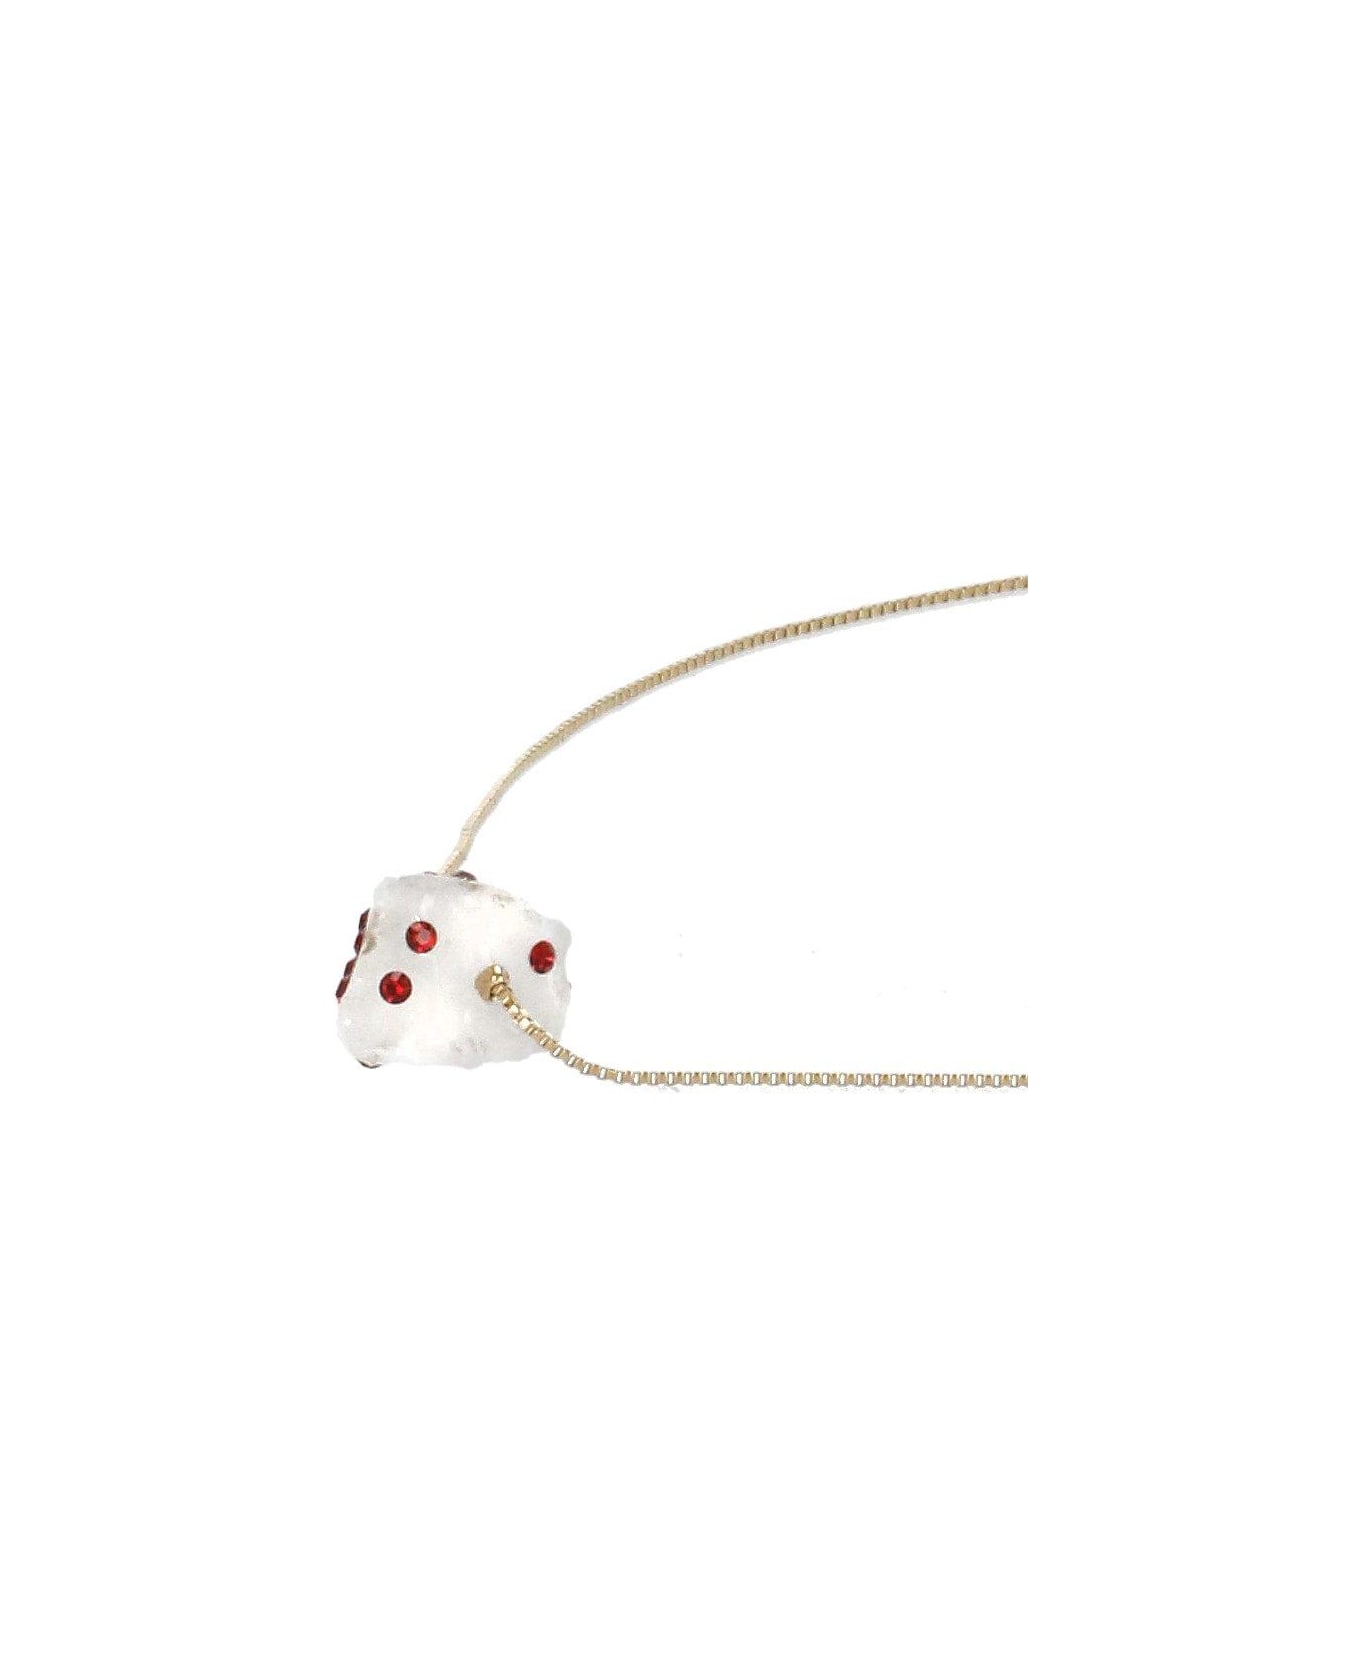 Marni Charm Detailed Pendant Necklace - WHITE/RED